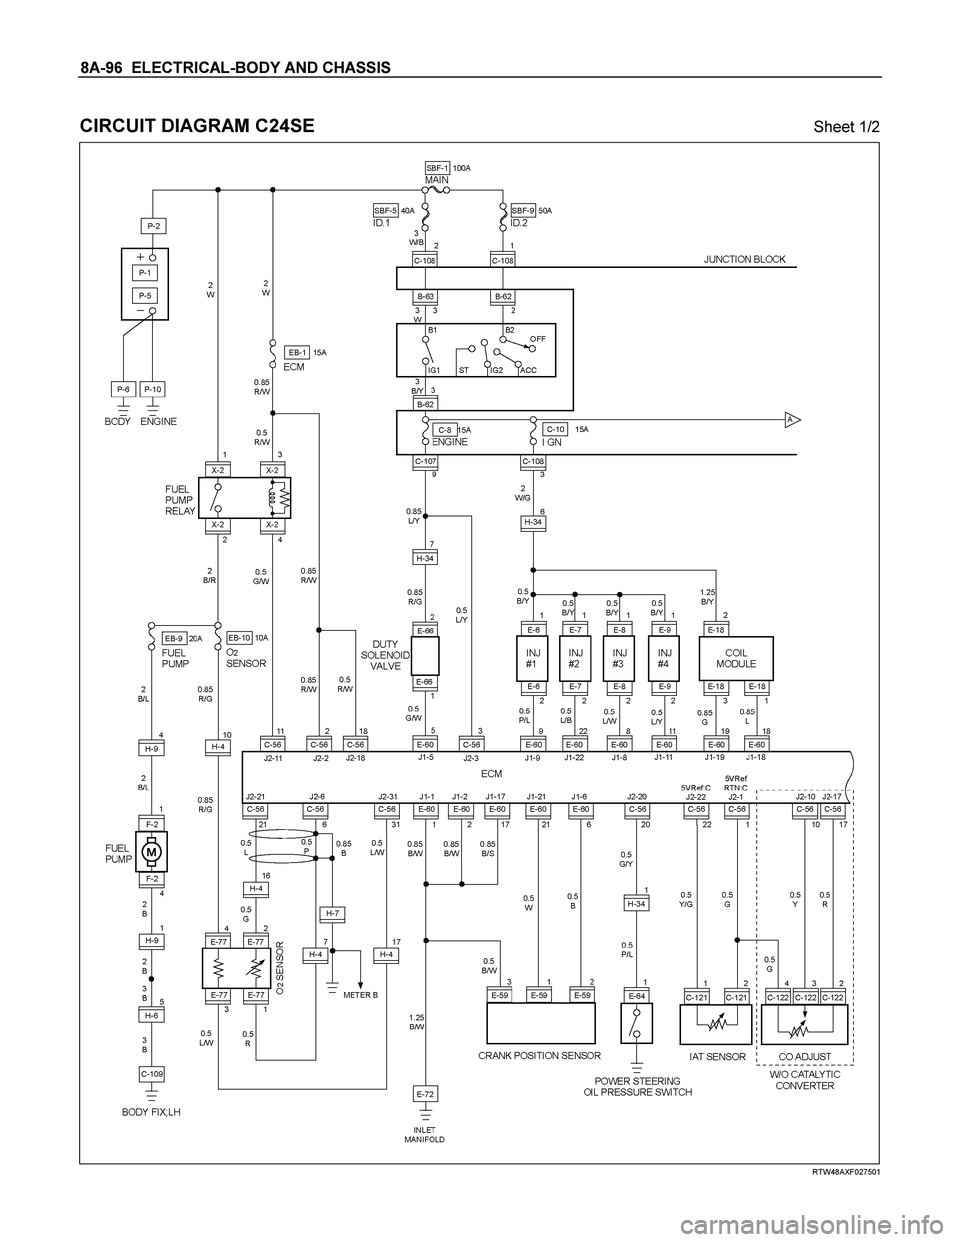 ISUZU TF SERIES 2004  Workshop Manual 8A-96  ELECTRICAL-BODY AND CHASSIS 
 
CIRCUIT DIAGRAM C24SE Sheet 1/2 
  
 
 
RTW48AXF027501  